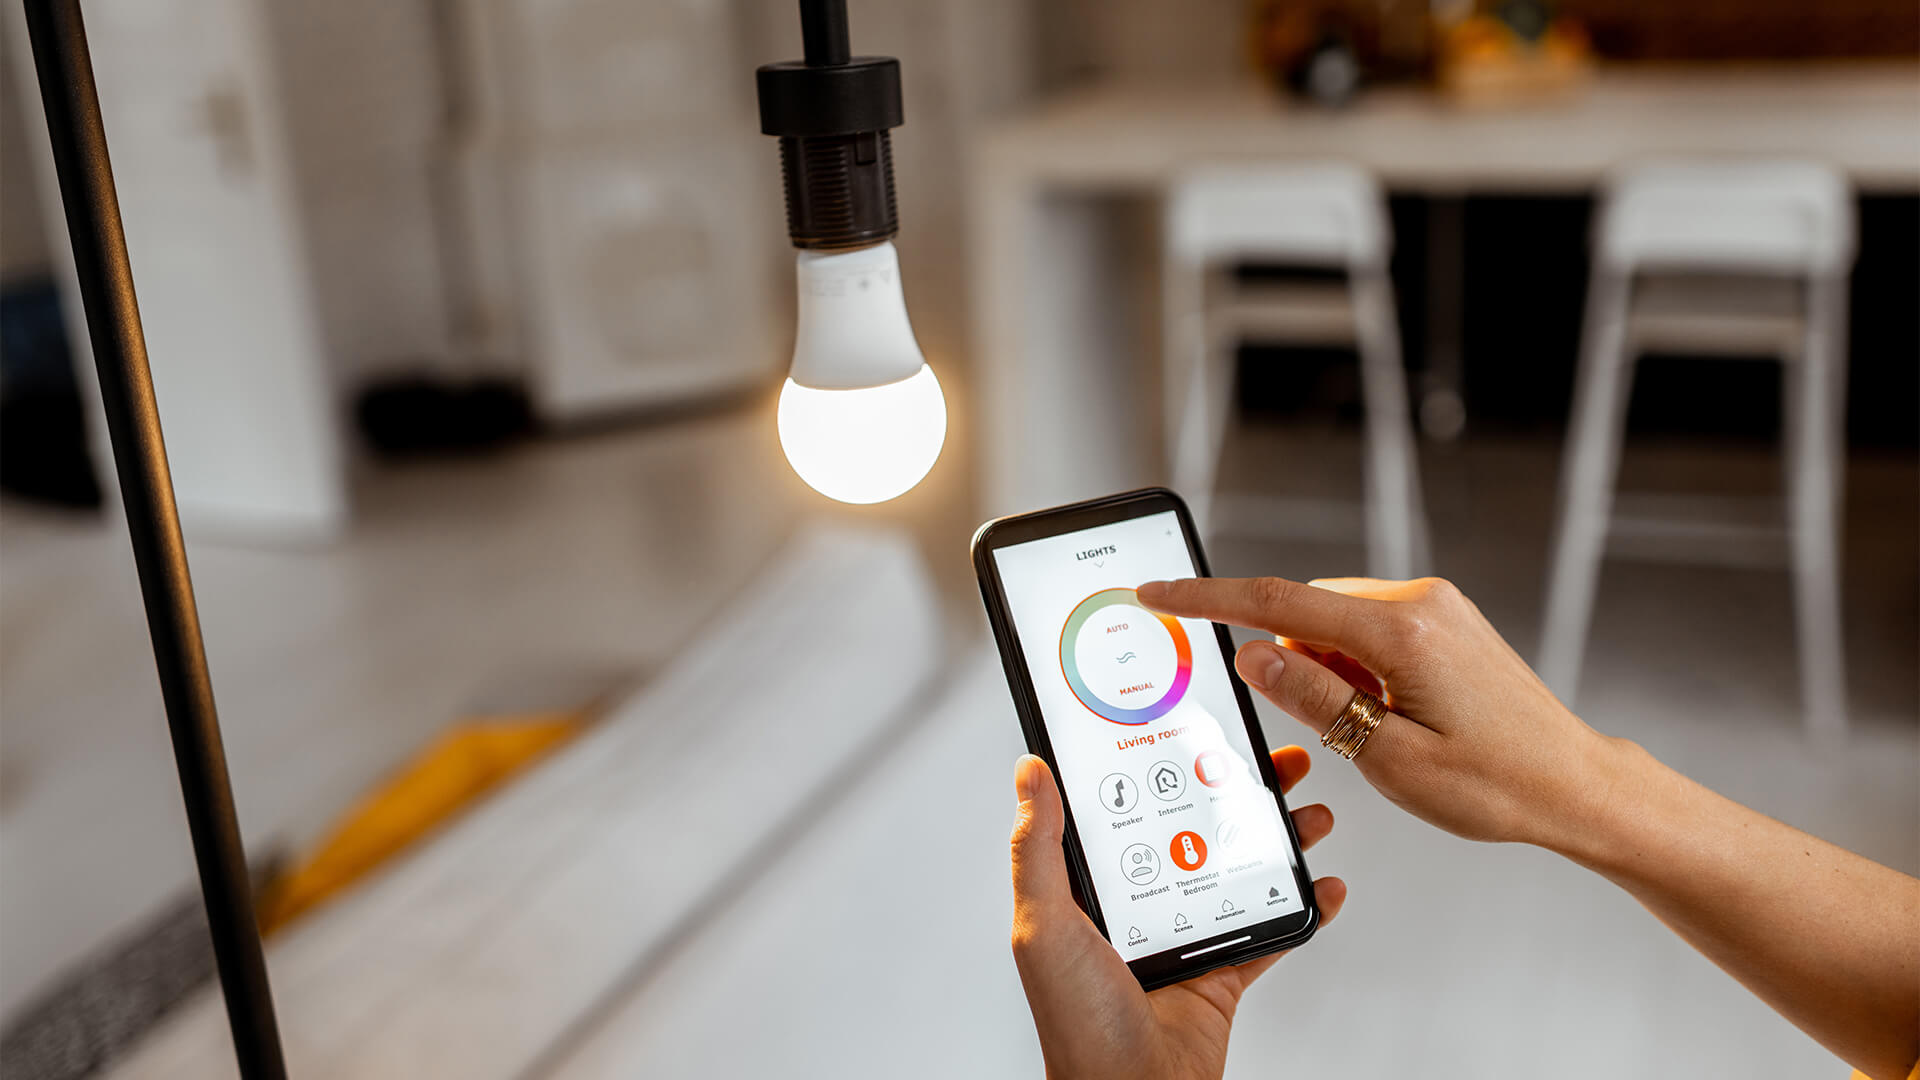 LED smart bulb being used through bluetooth on a mobile phone device